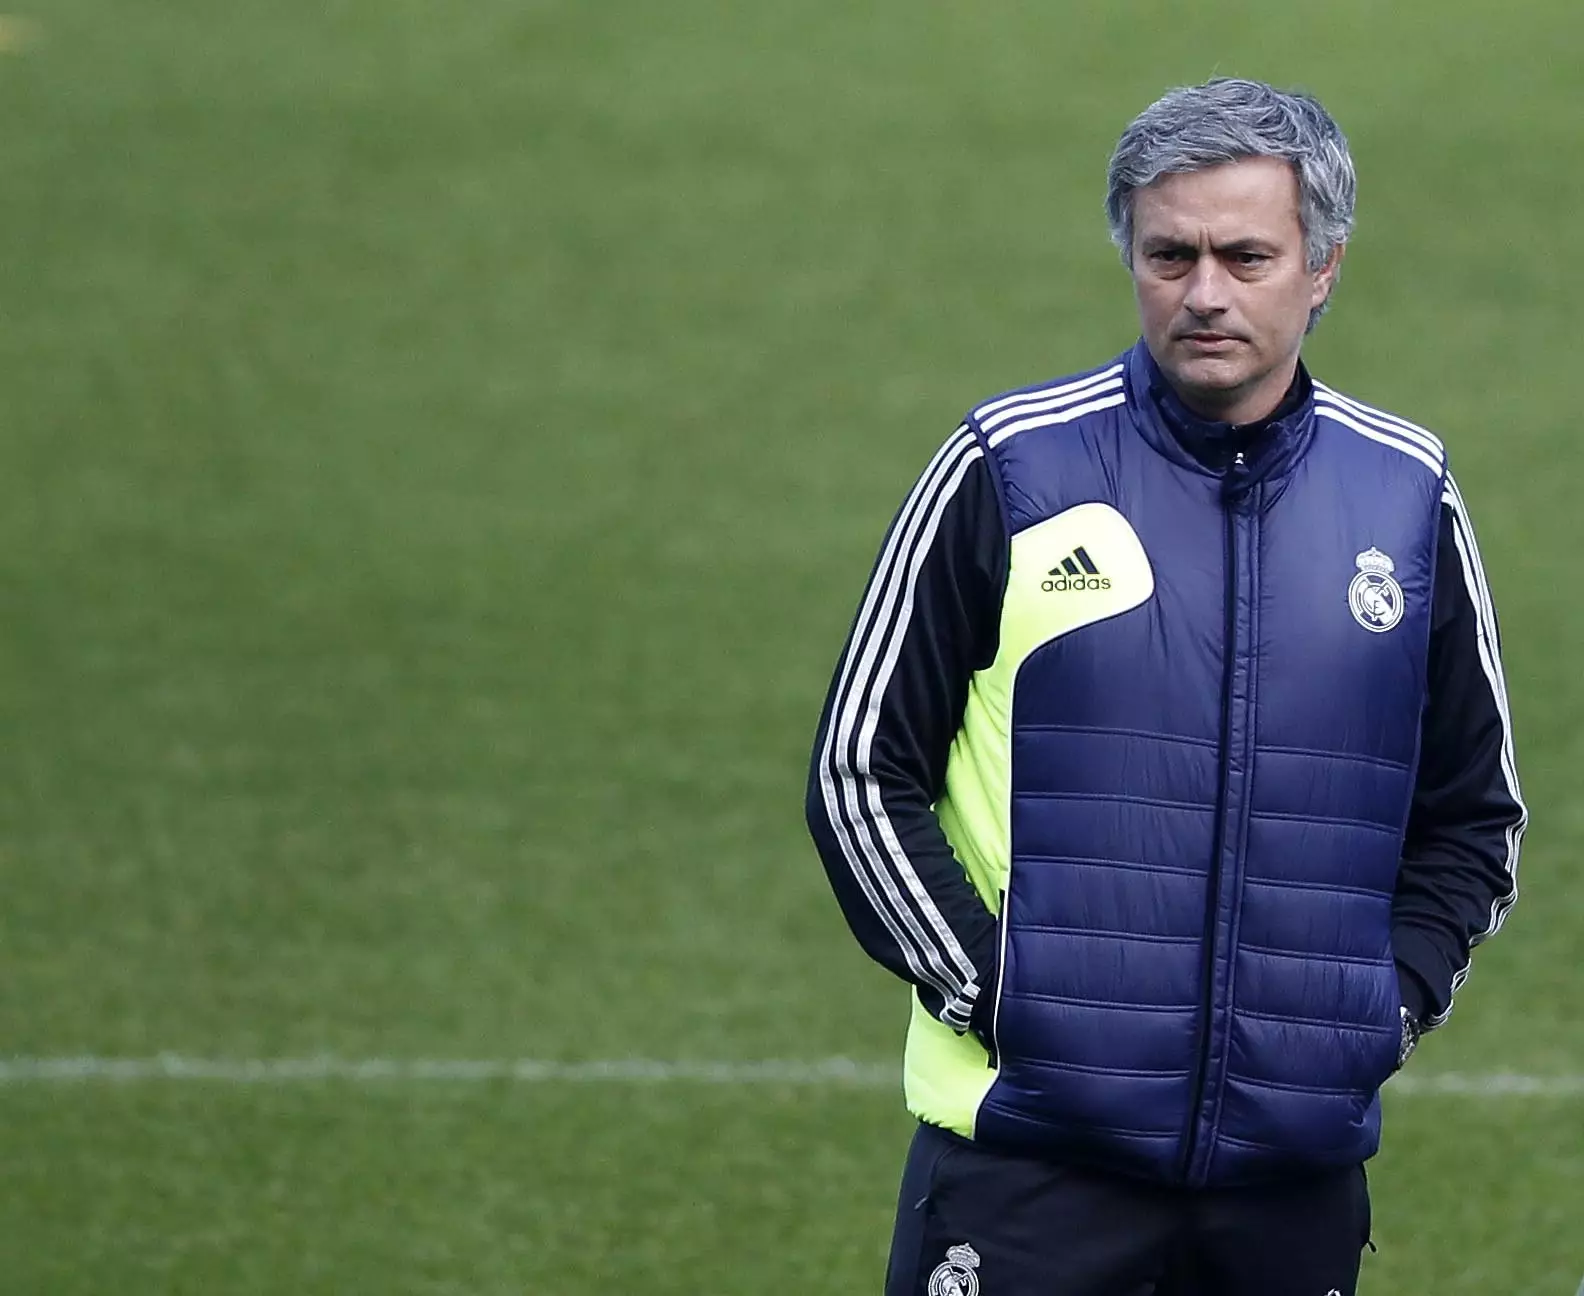 Mourinho has already had one spell in Spain. Image: PA Images